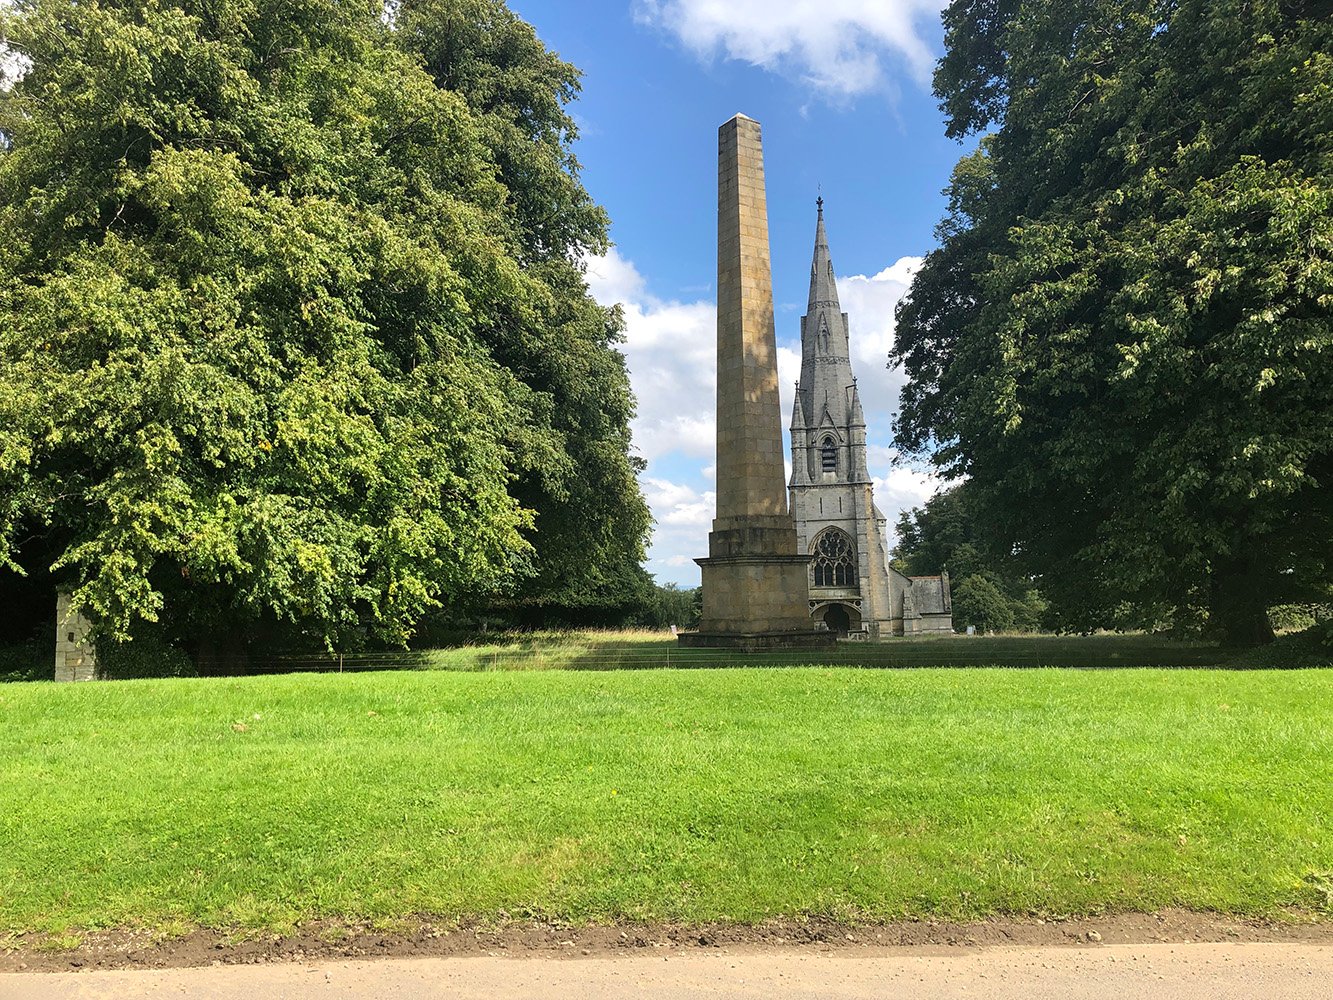 Image name obelisk and church studley royal fountains abbey north yorkshire the 2 image from the post A look at the history of Studley Royal, North Yorkshire, with Dr Emma Wells in Yorkshire.com.